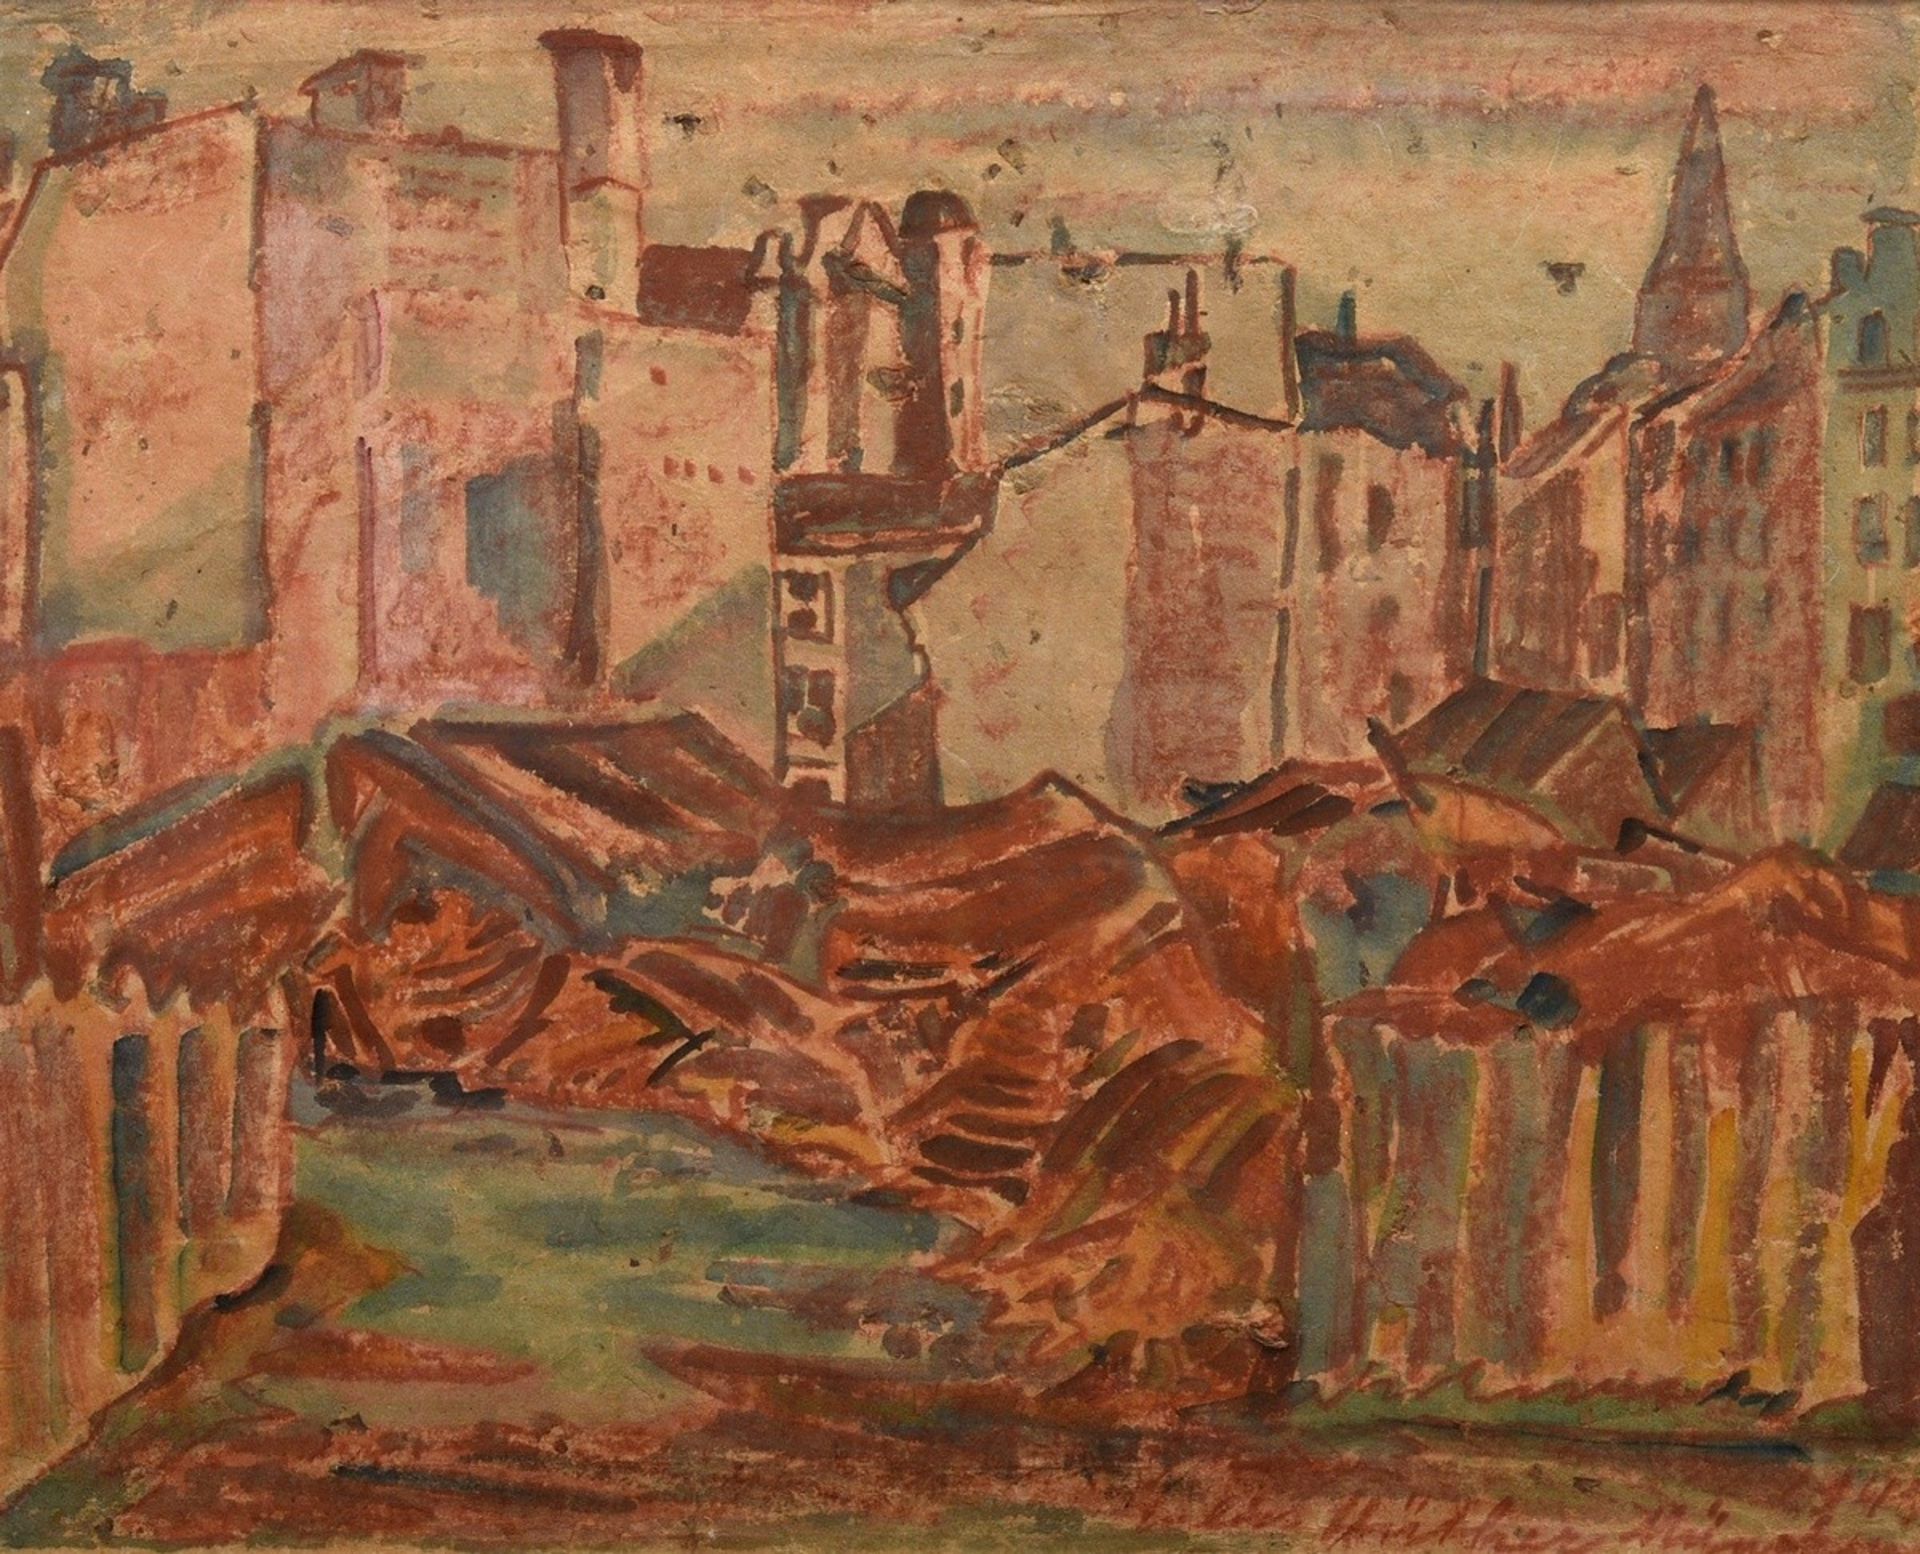 Hüther, Julius (1881-1954) "Houses and Ruins" (probably Munich) 1945(?), watercolour/coloured penci